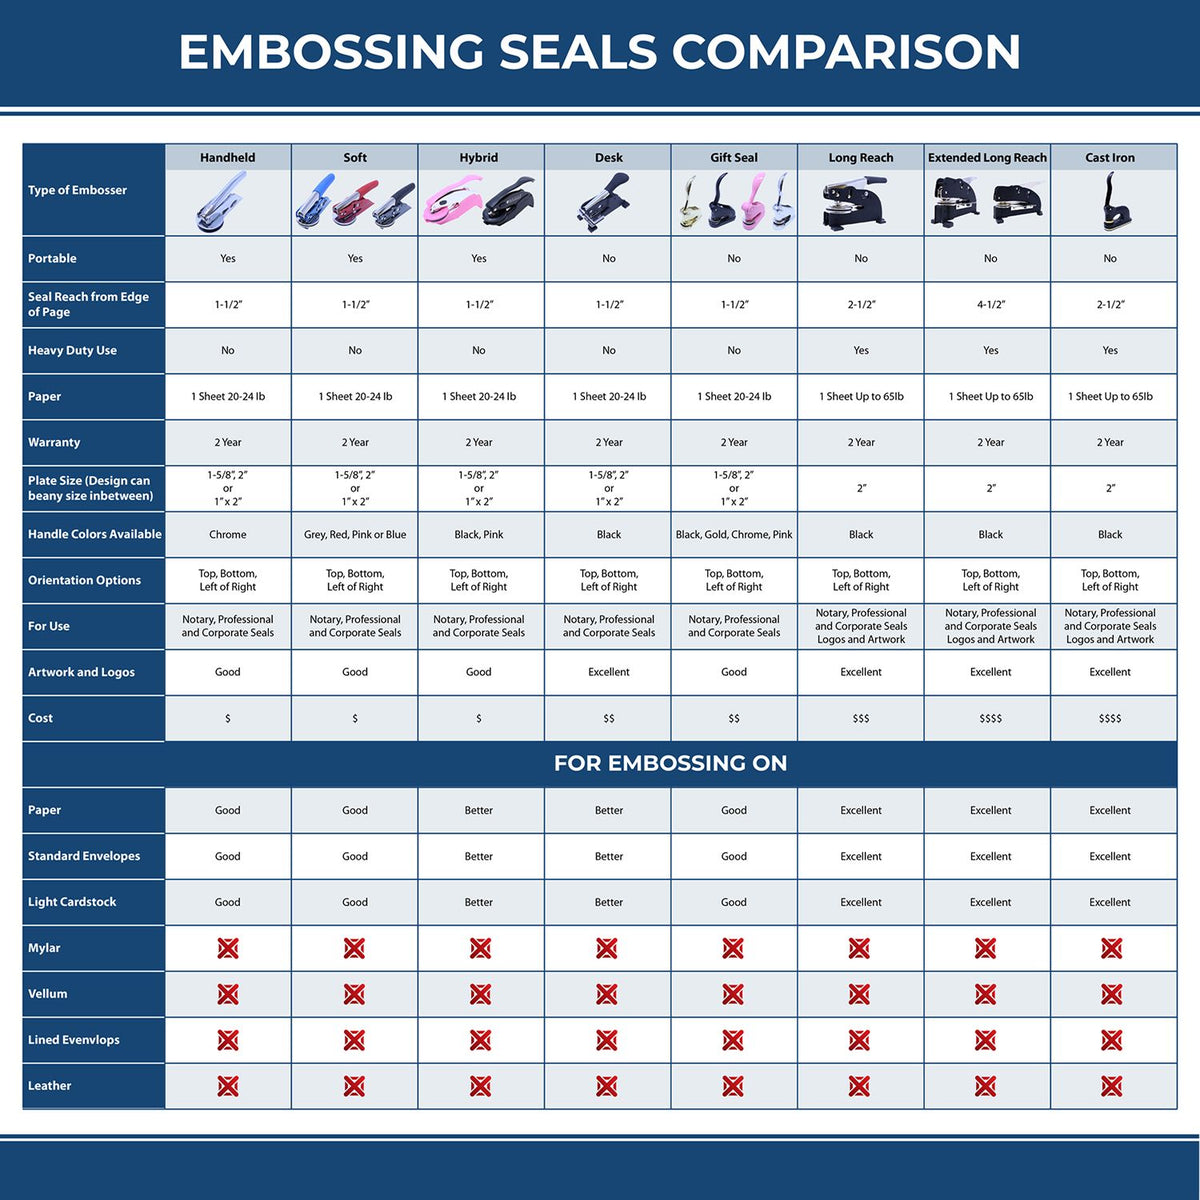 A comparison chart for the different types of mount models available for the Delaware Engineer Desk Seal.